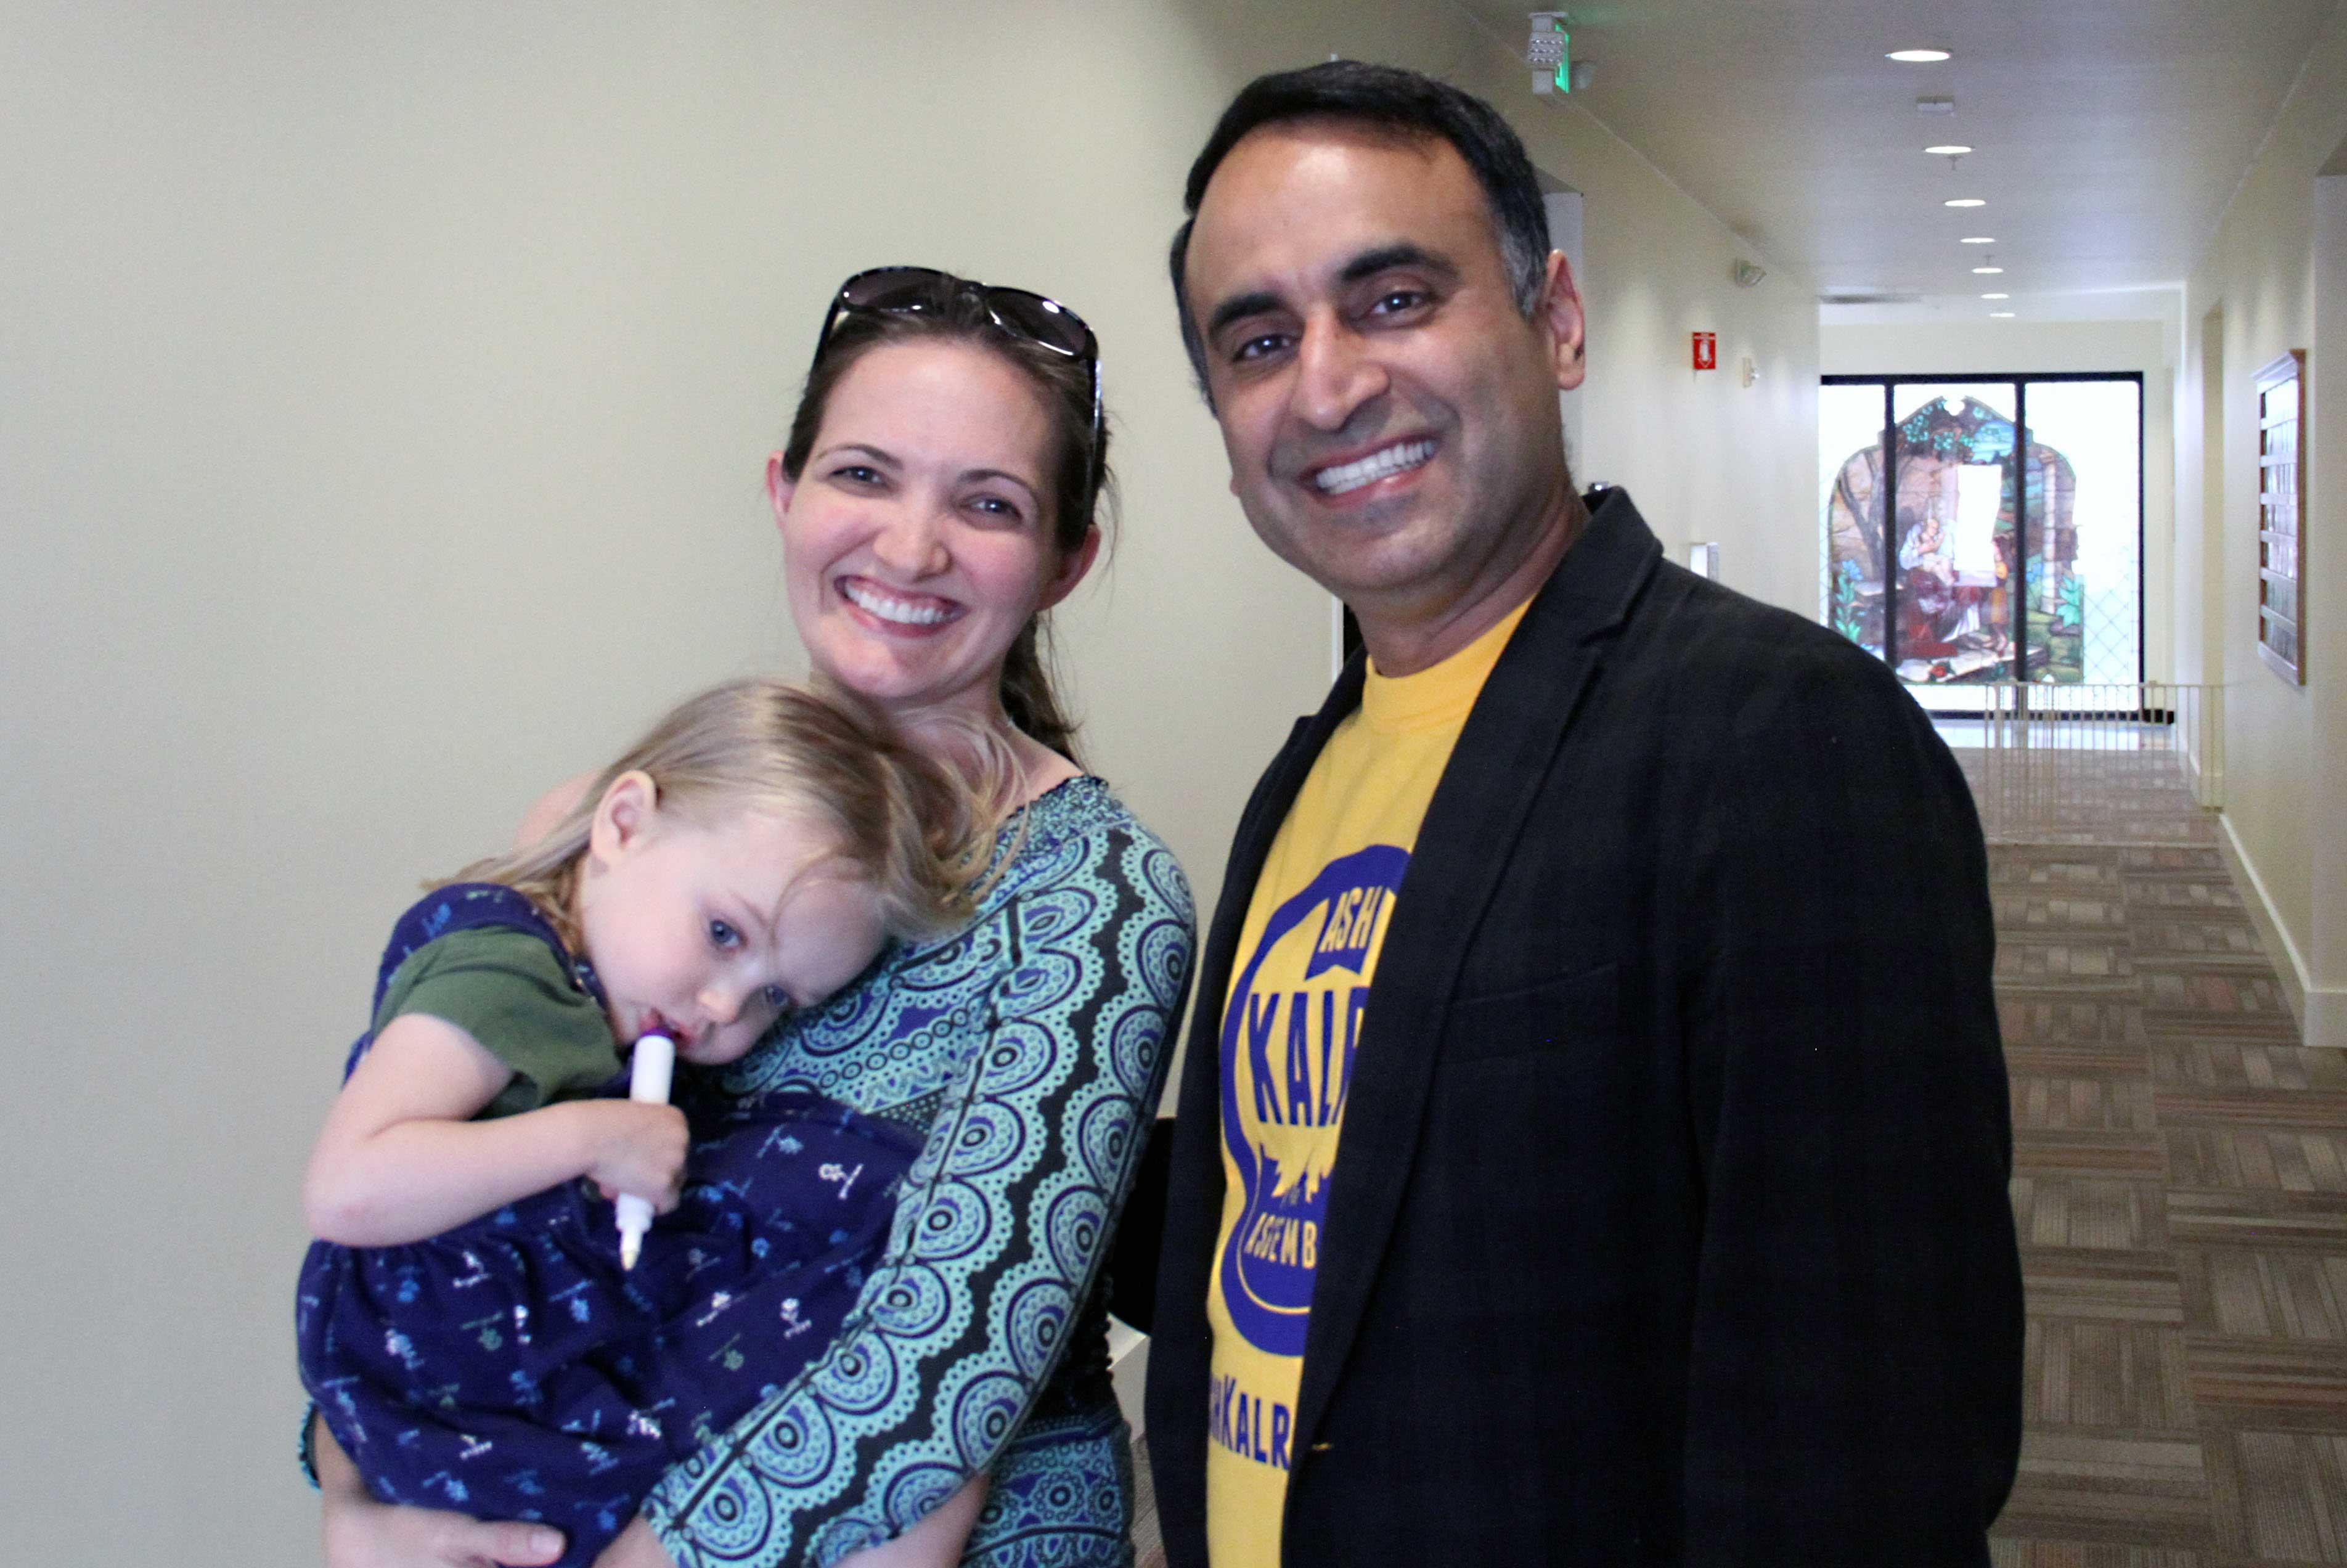 An AFSCME Local 101 member with San Jose City Councilman Ash Kalra, who is running for California State Assembly.